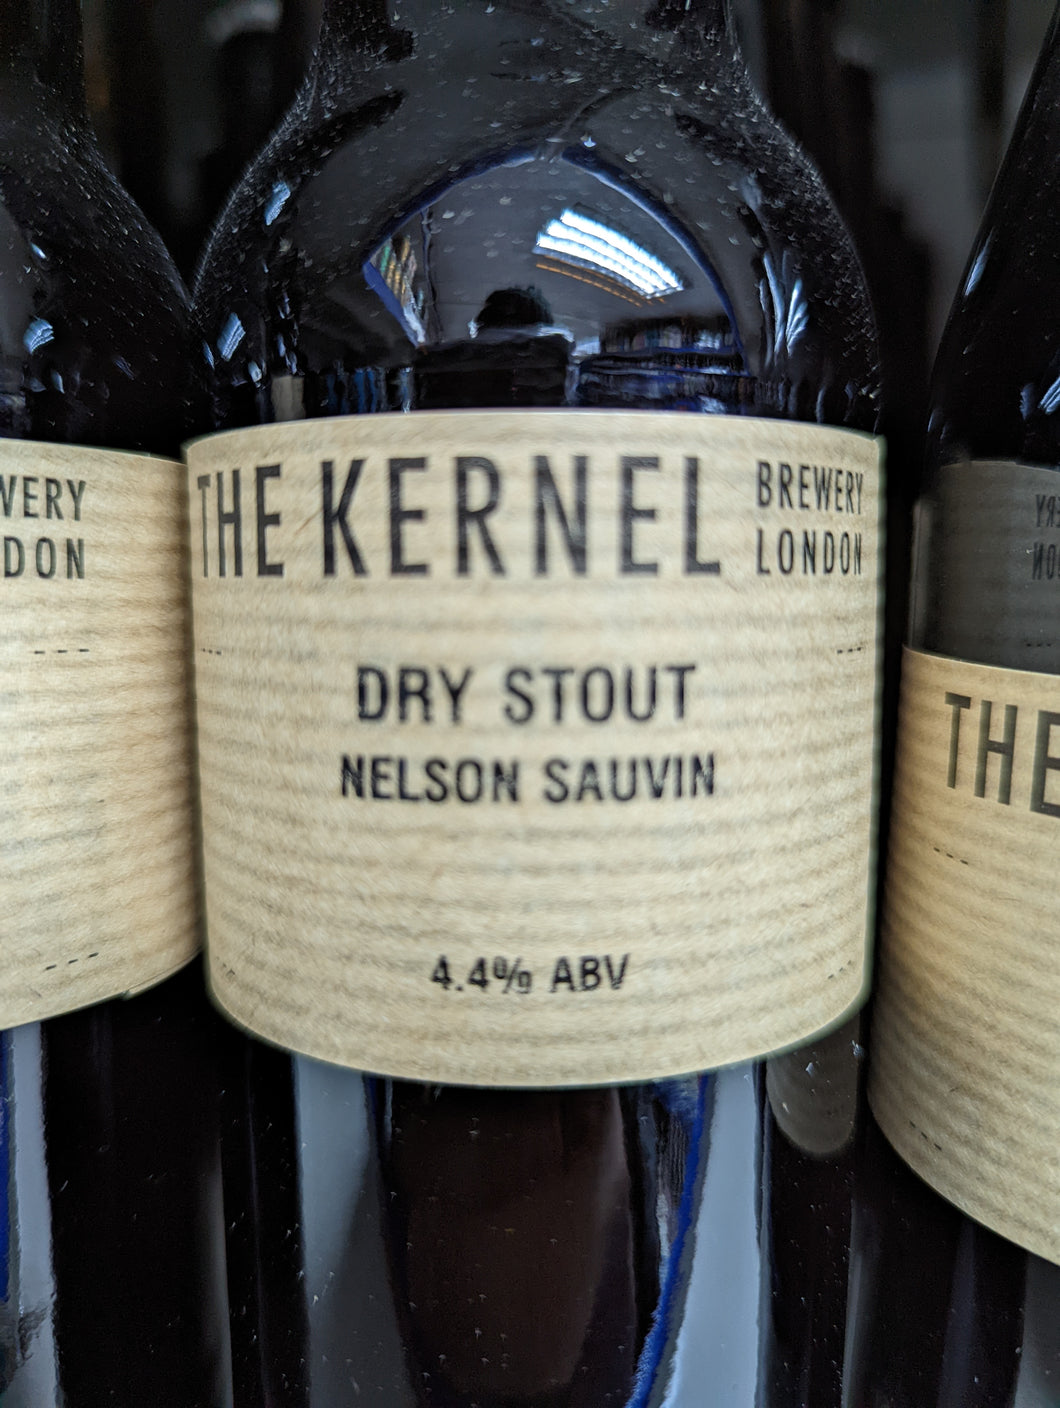 Dry Stout Nelson Sauvin - The Kernel Brewery - Dry Stout, 4.4%, 330ml Bottle